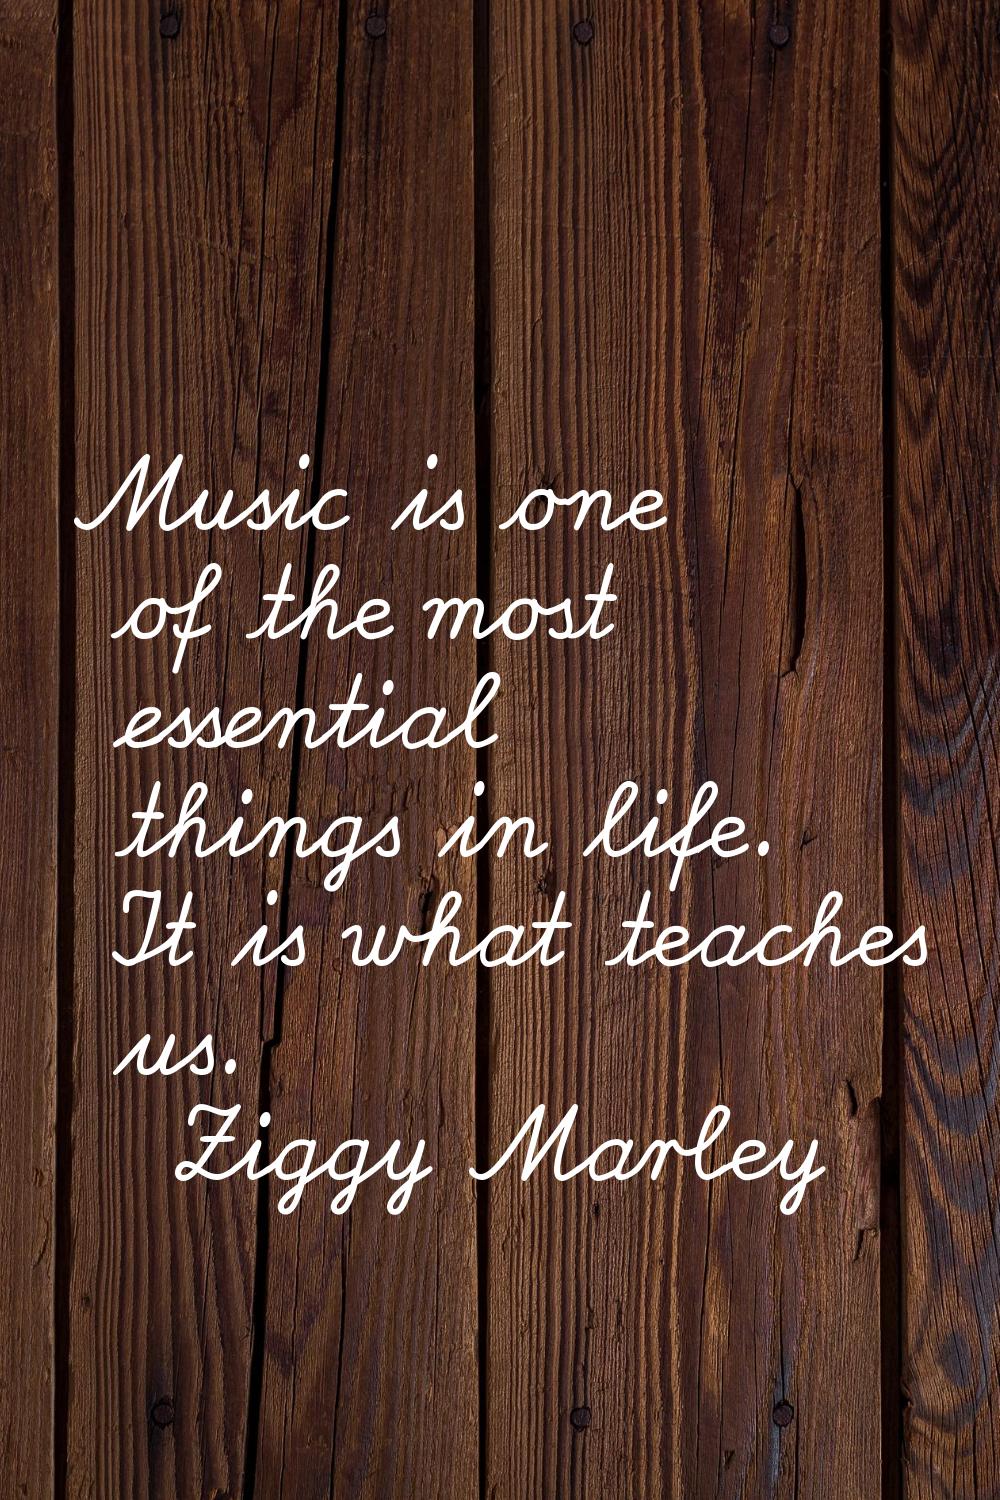 Music is one of the most essential things in life. It is what teaches us.